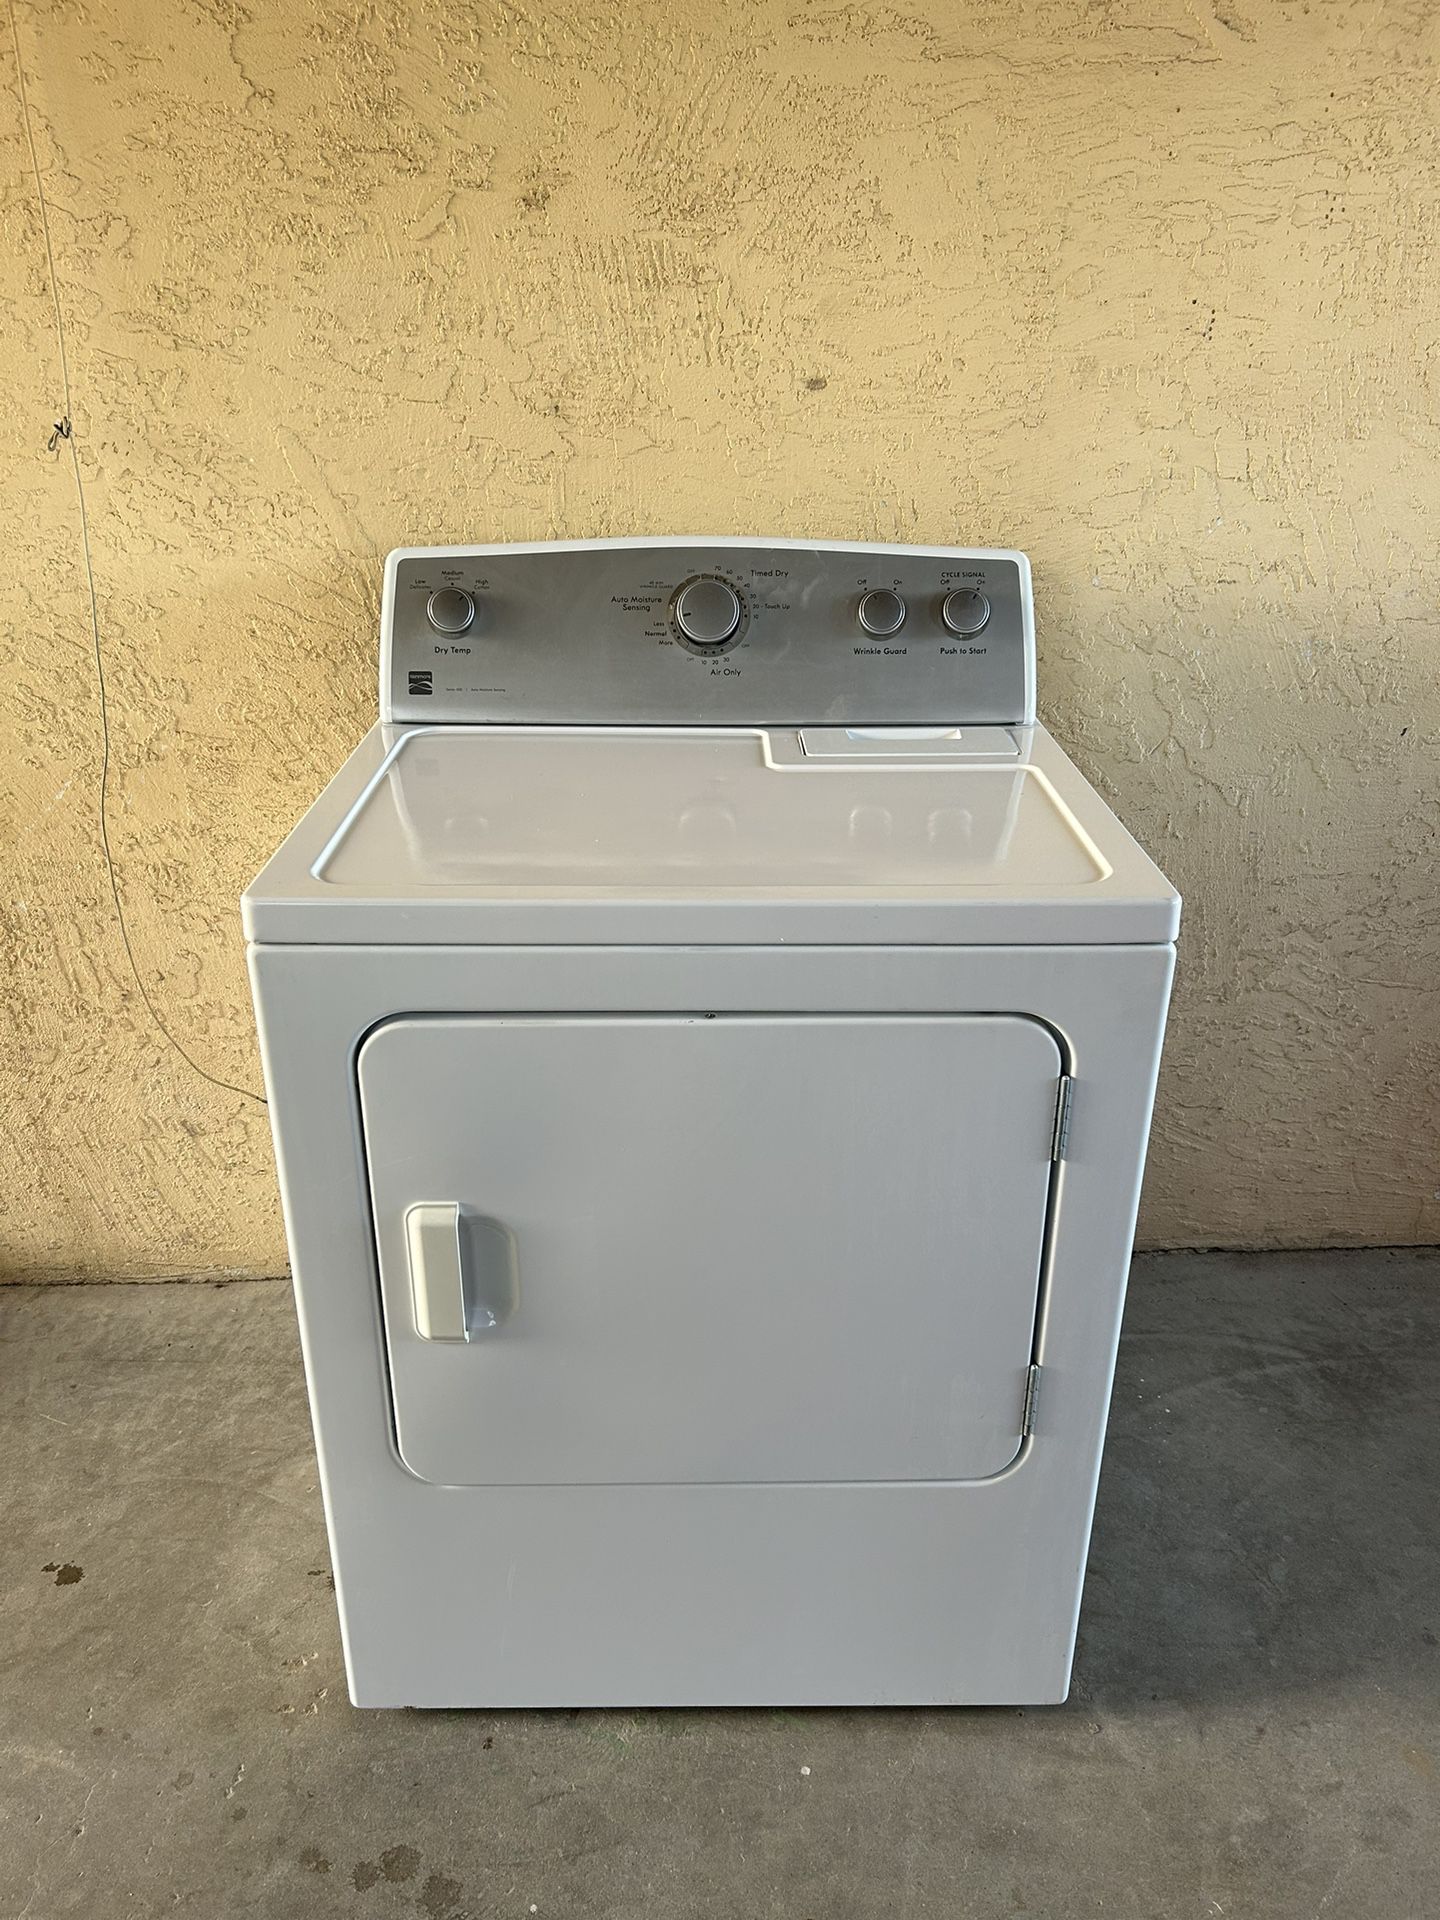 Newer Dryer/Electric/Kenmore/With Warranty